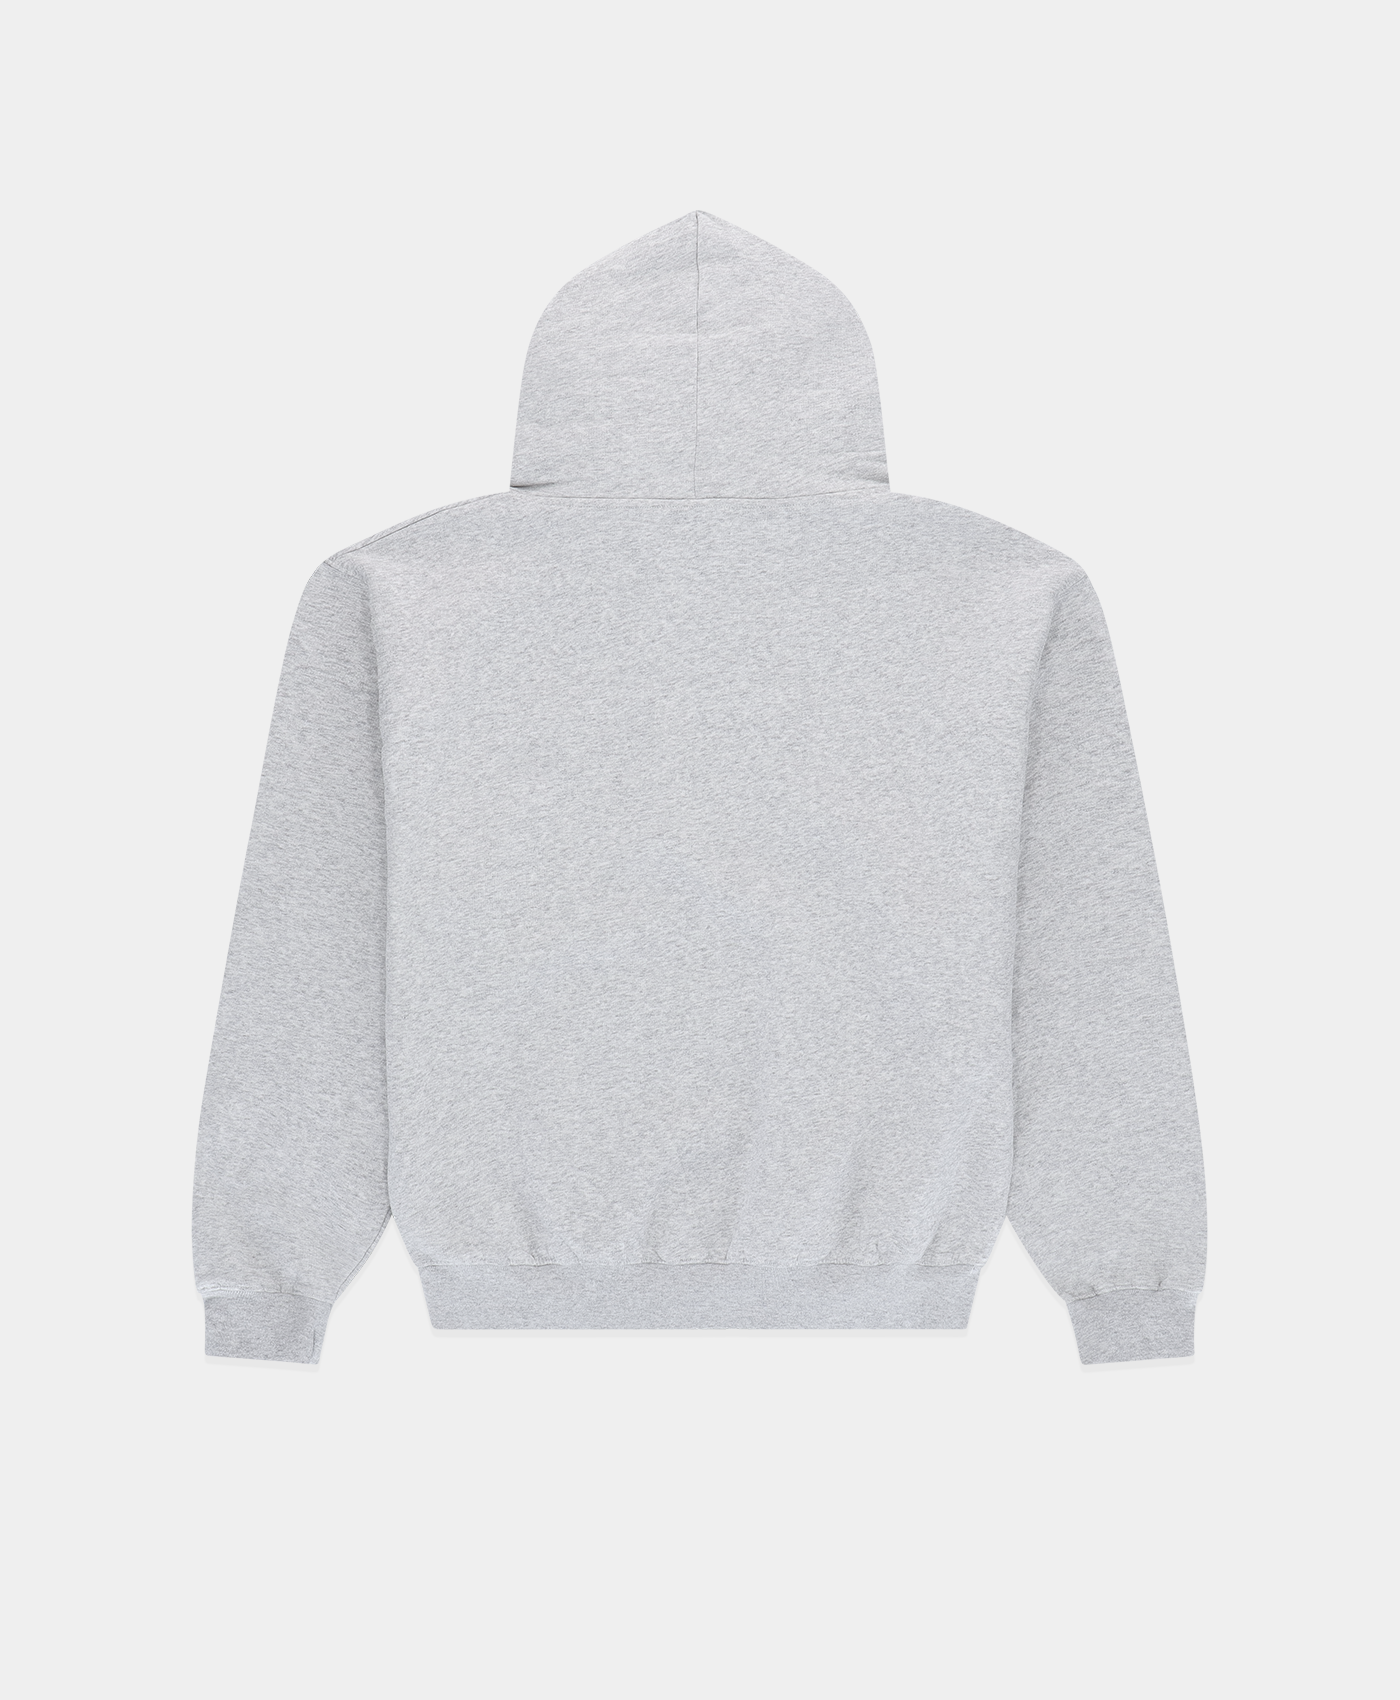 Double Melting Heart Hoodie Grey